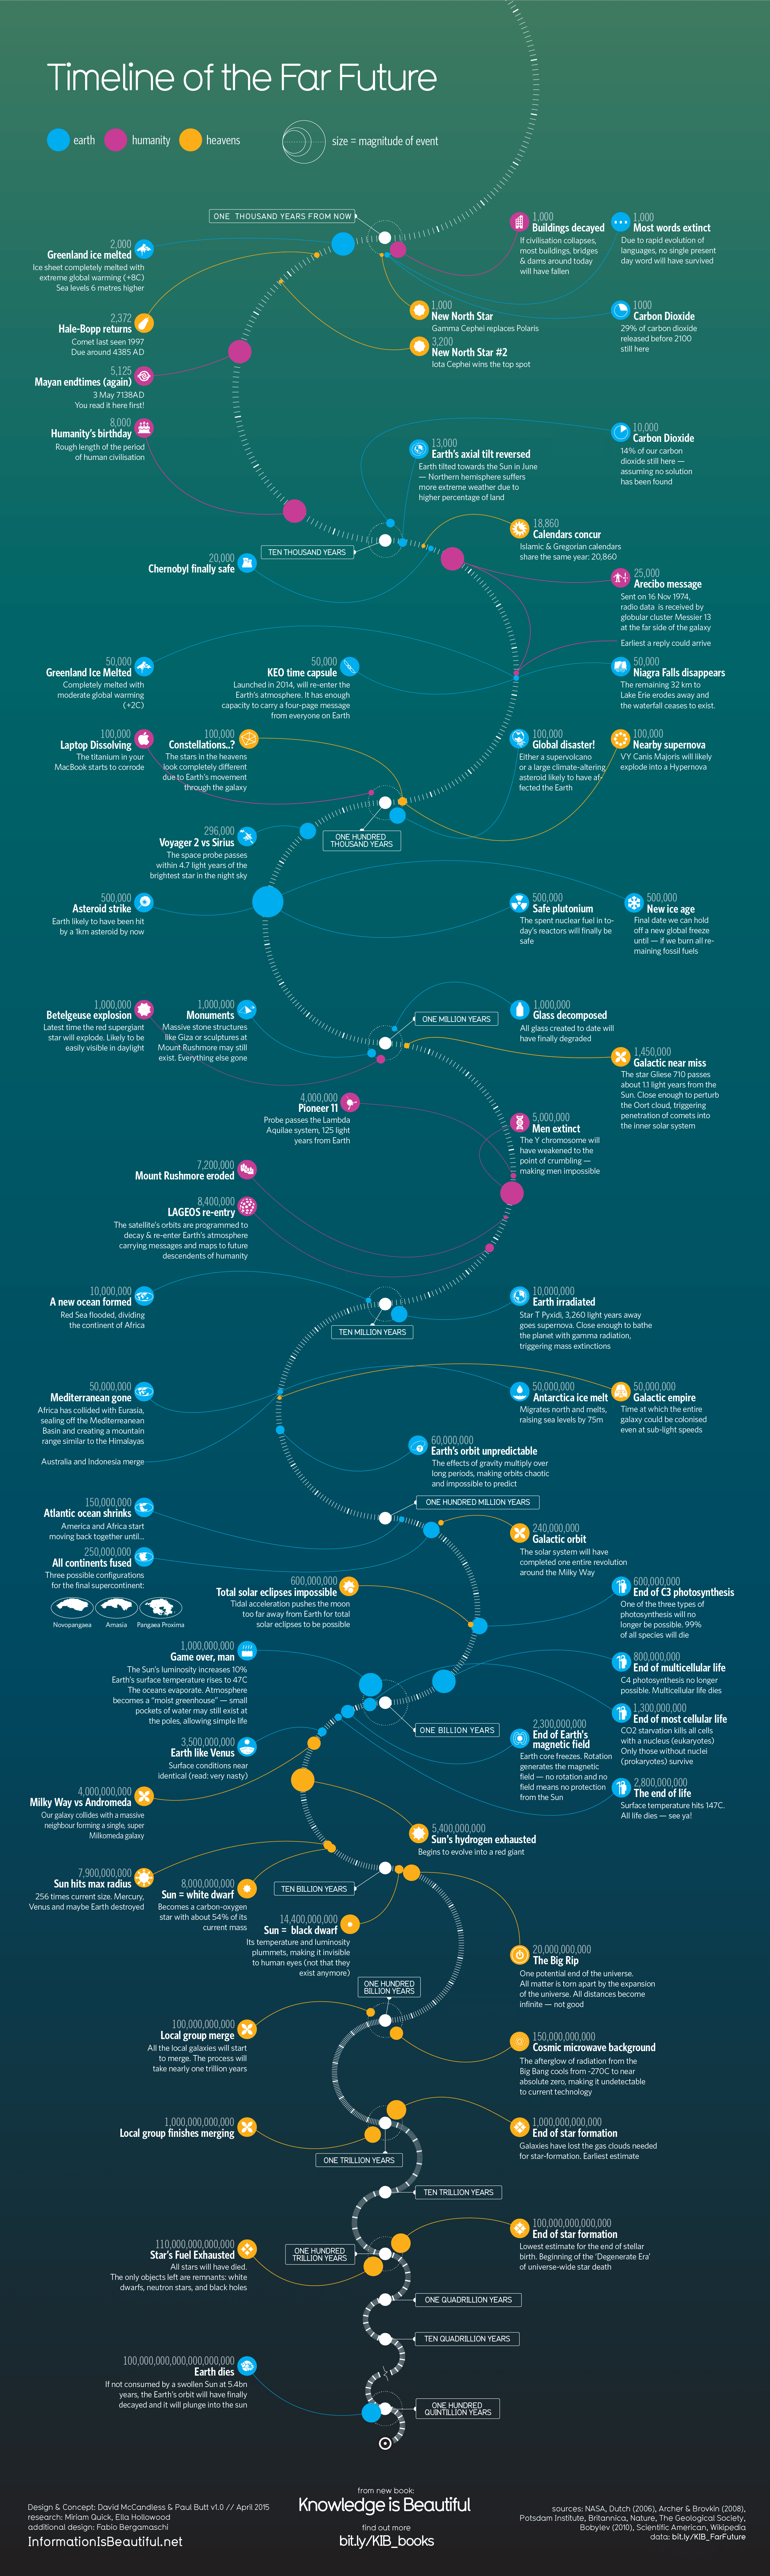 timeline of the far future